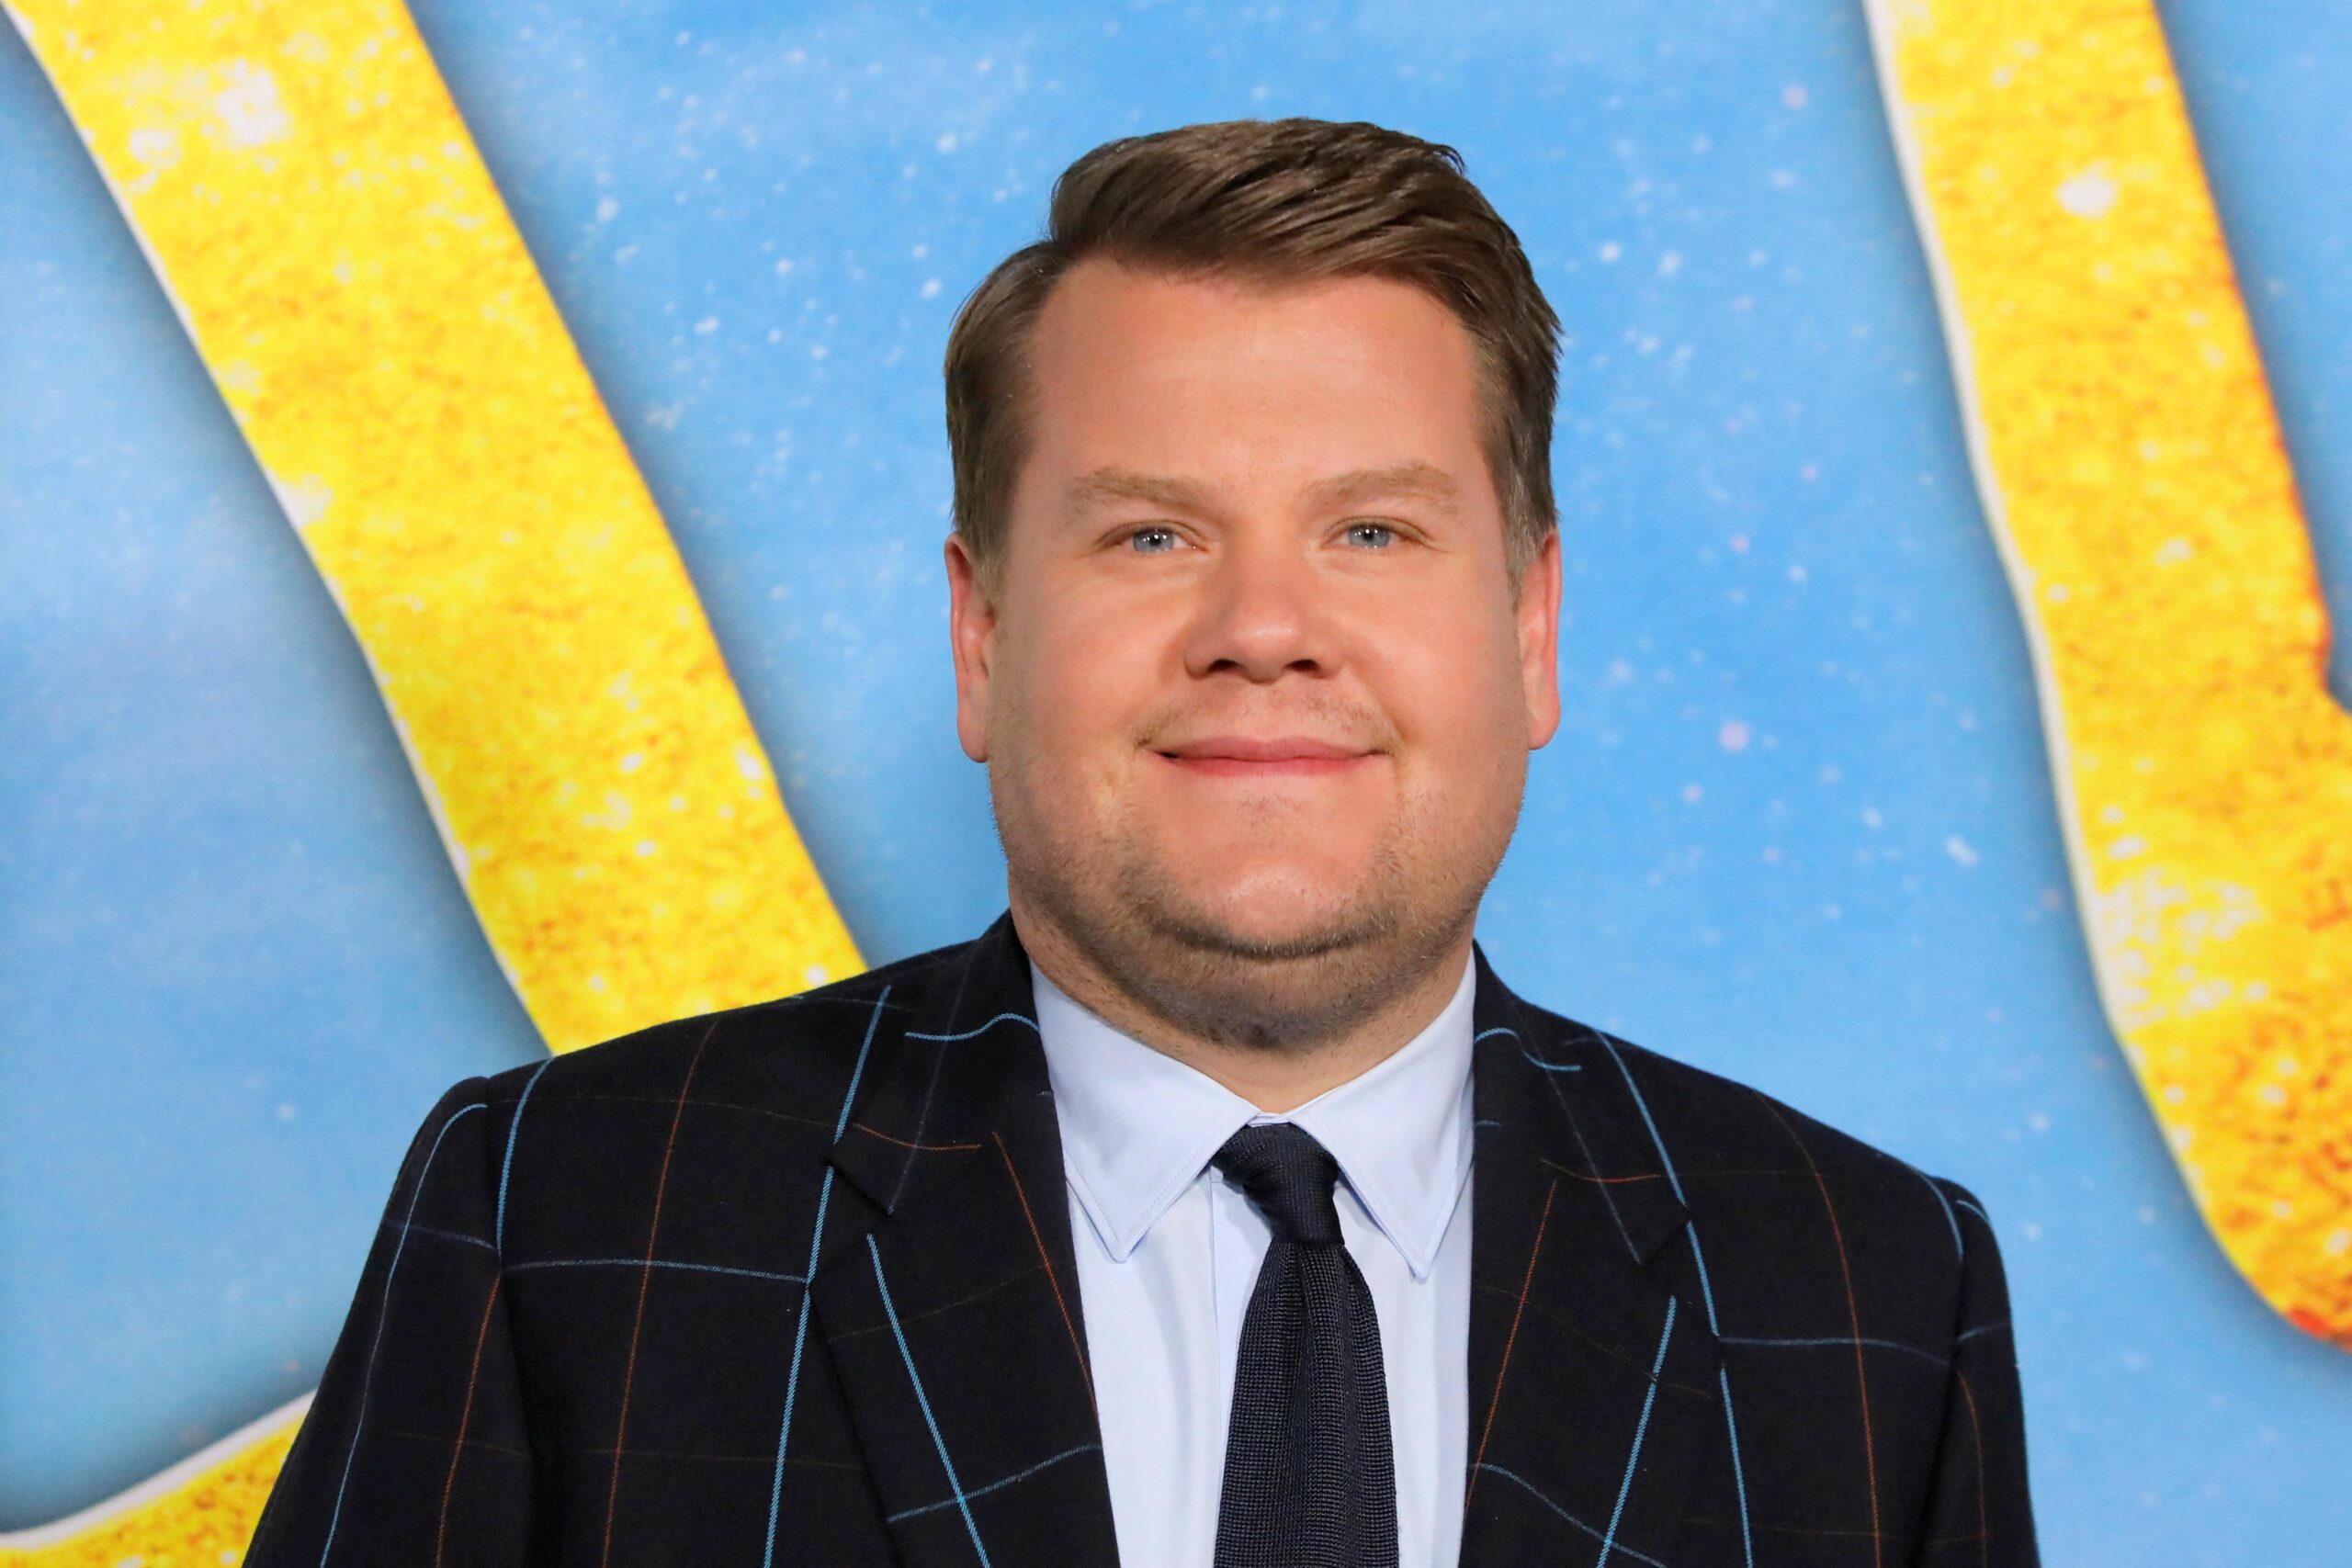 James Corden to leave ‘Late Late Show’ in 2023